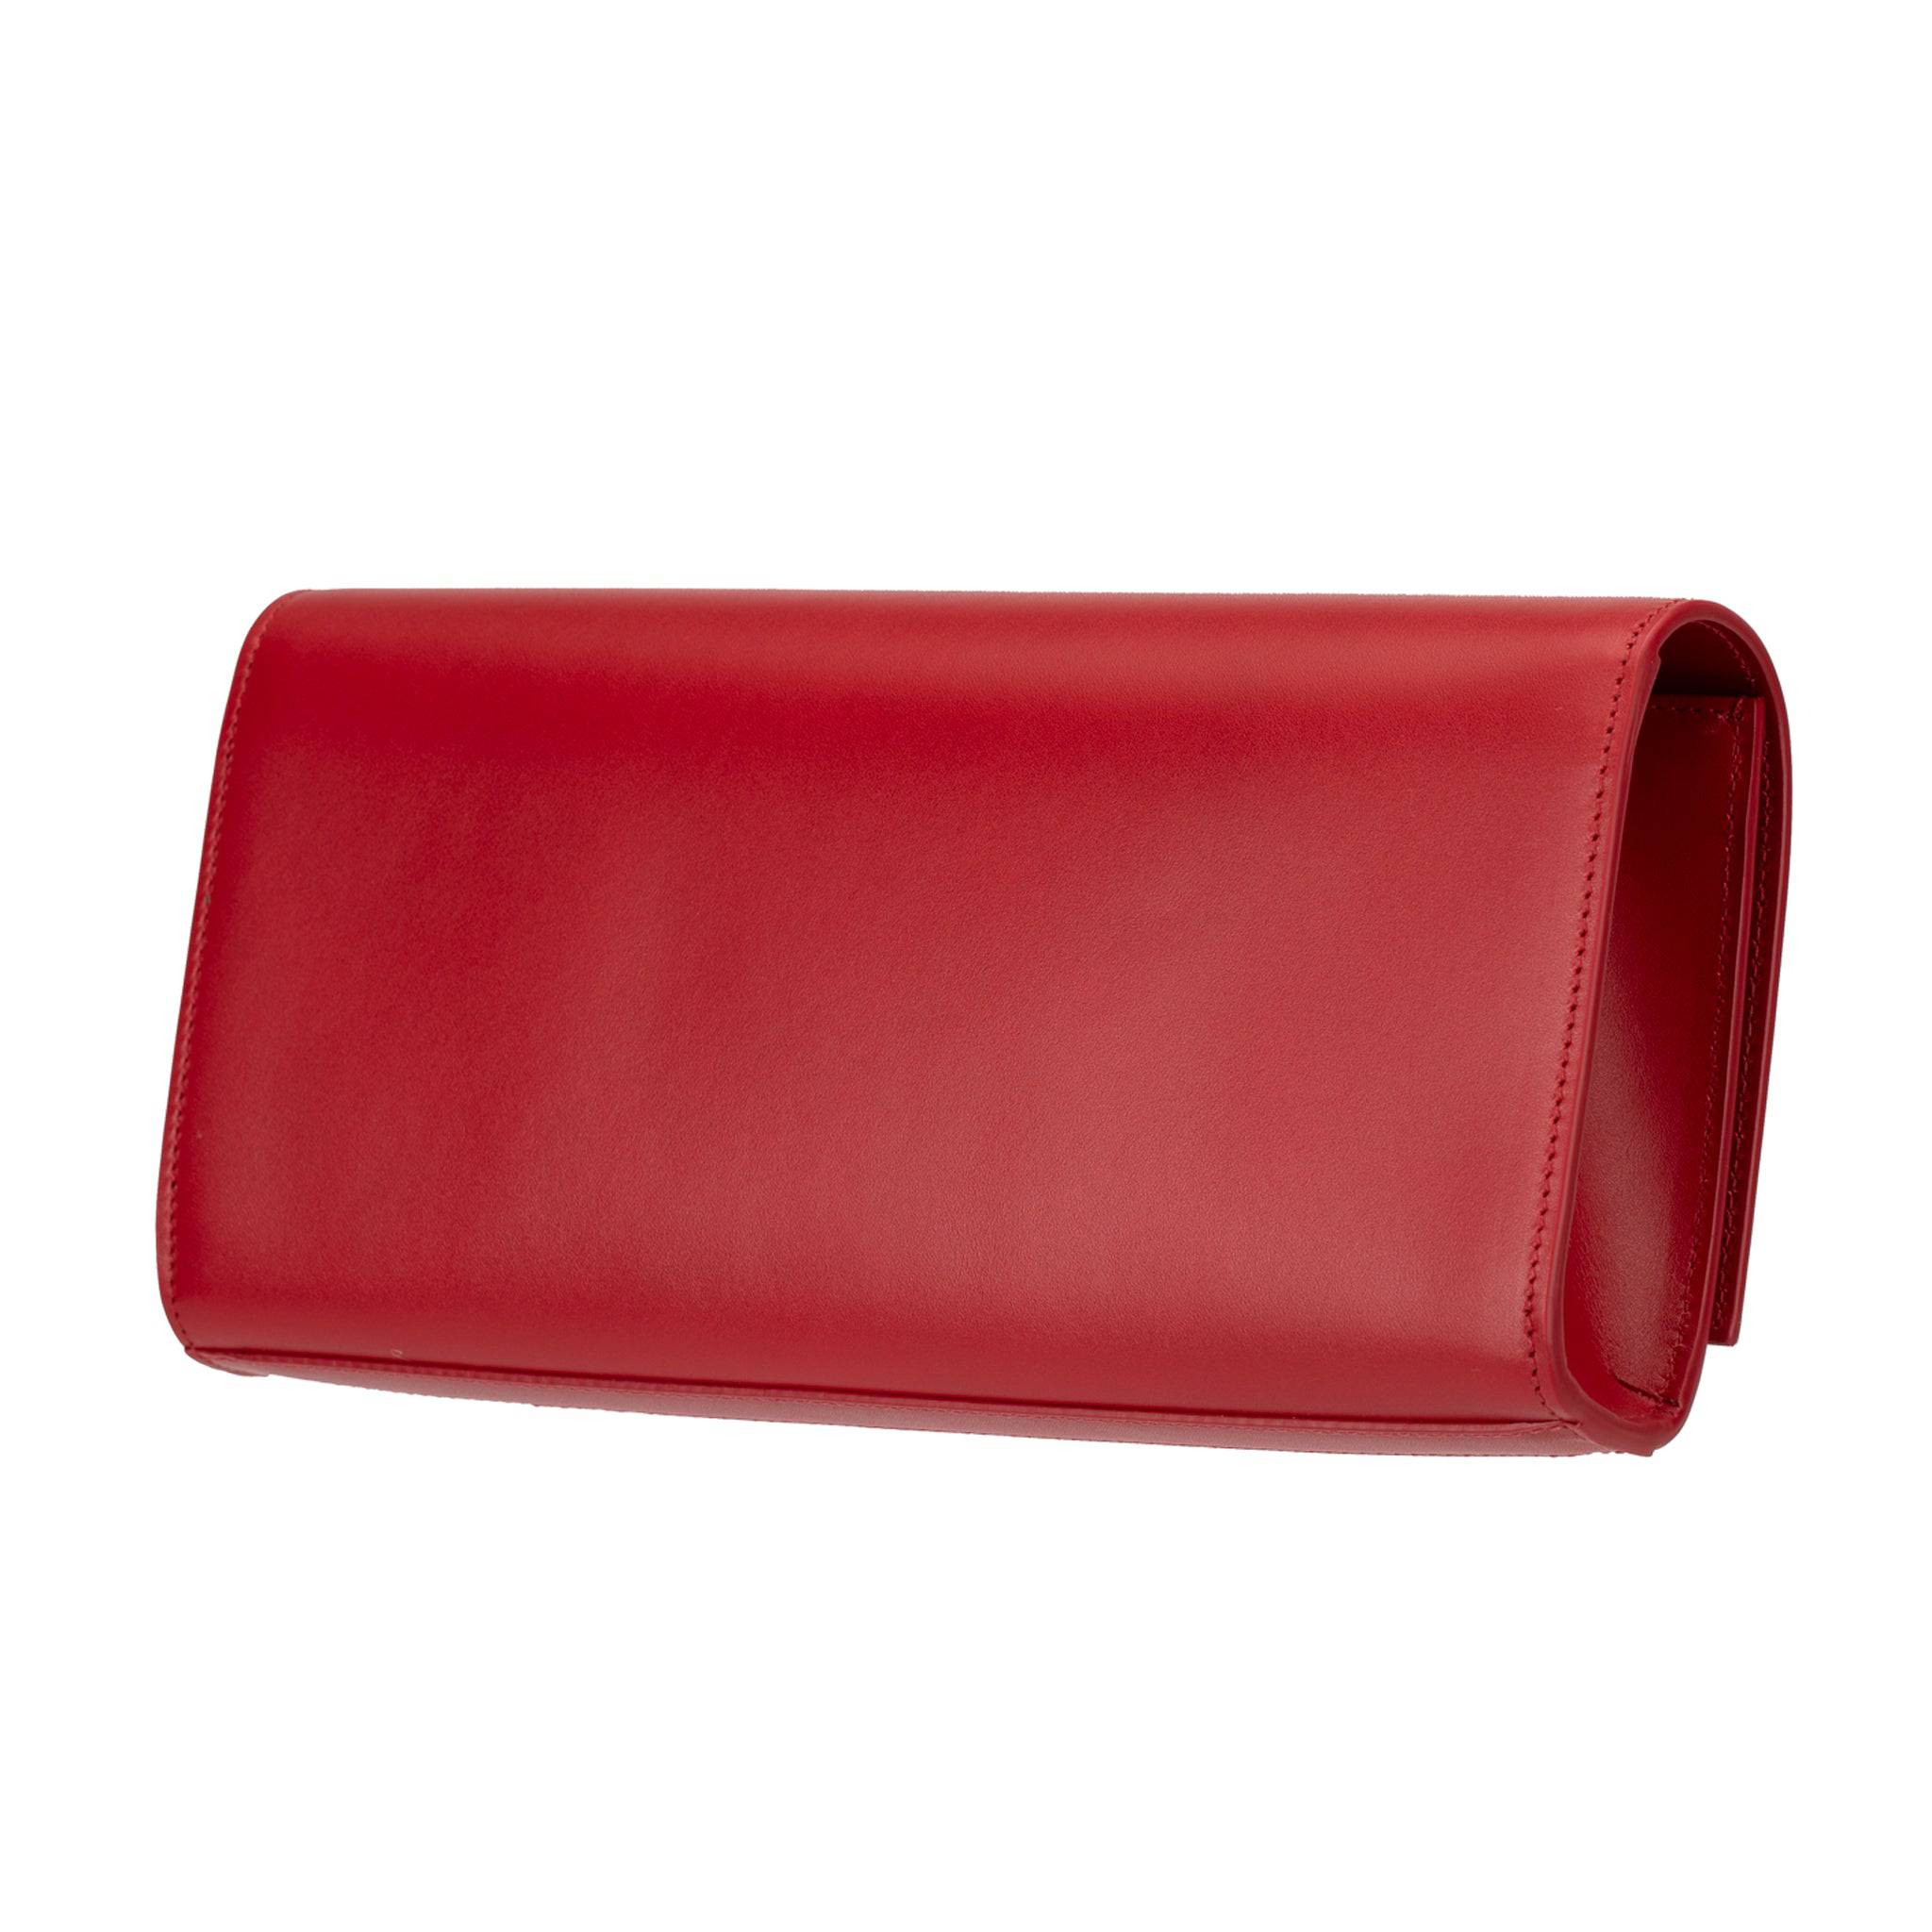 YVES SAINT LAURENT KATE CLUTCH ROUGE SMOOTH LEATHER GOLD HARDWARE - On Repeat